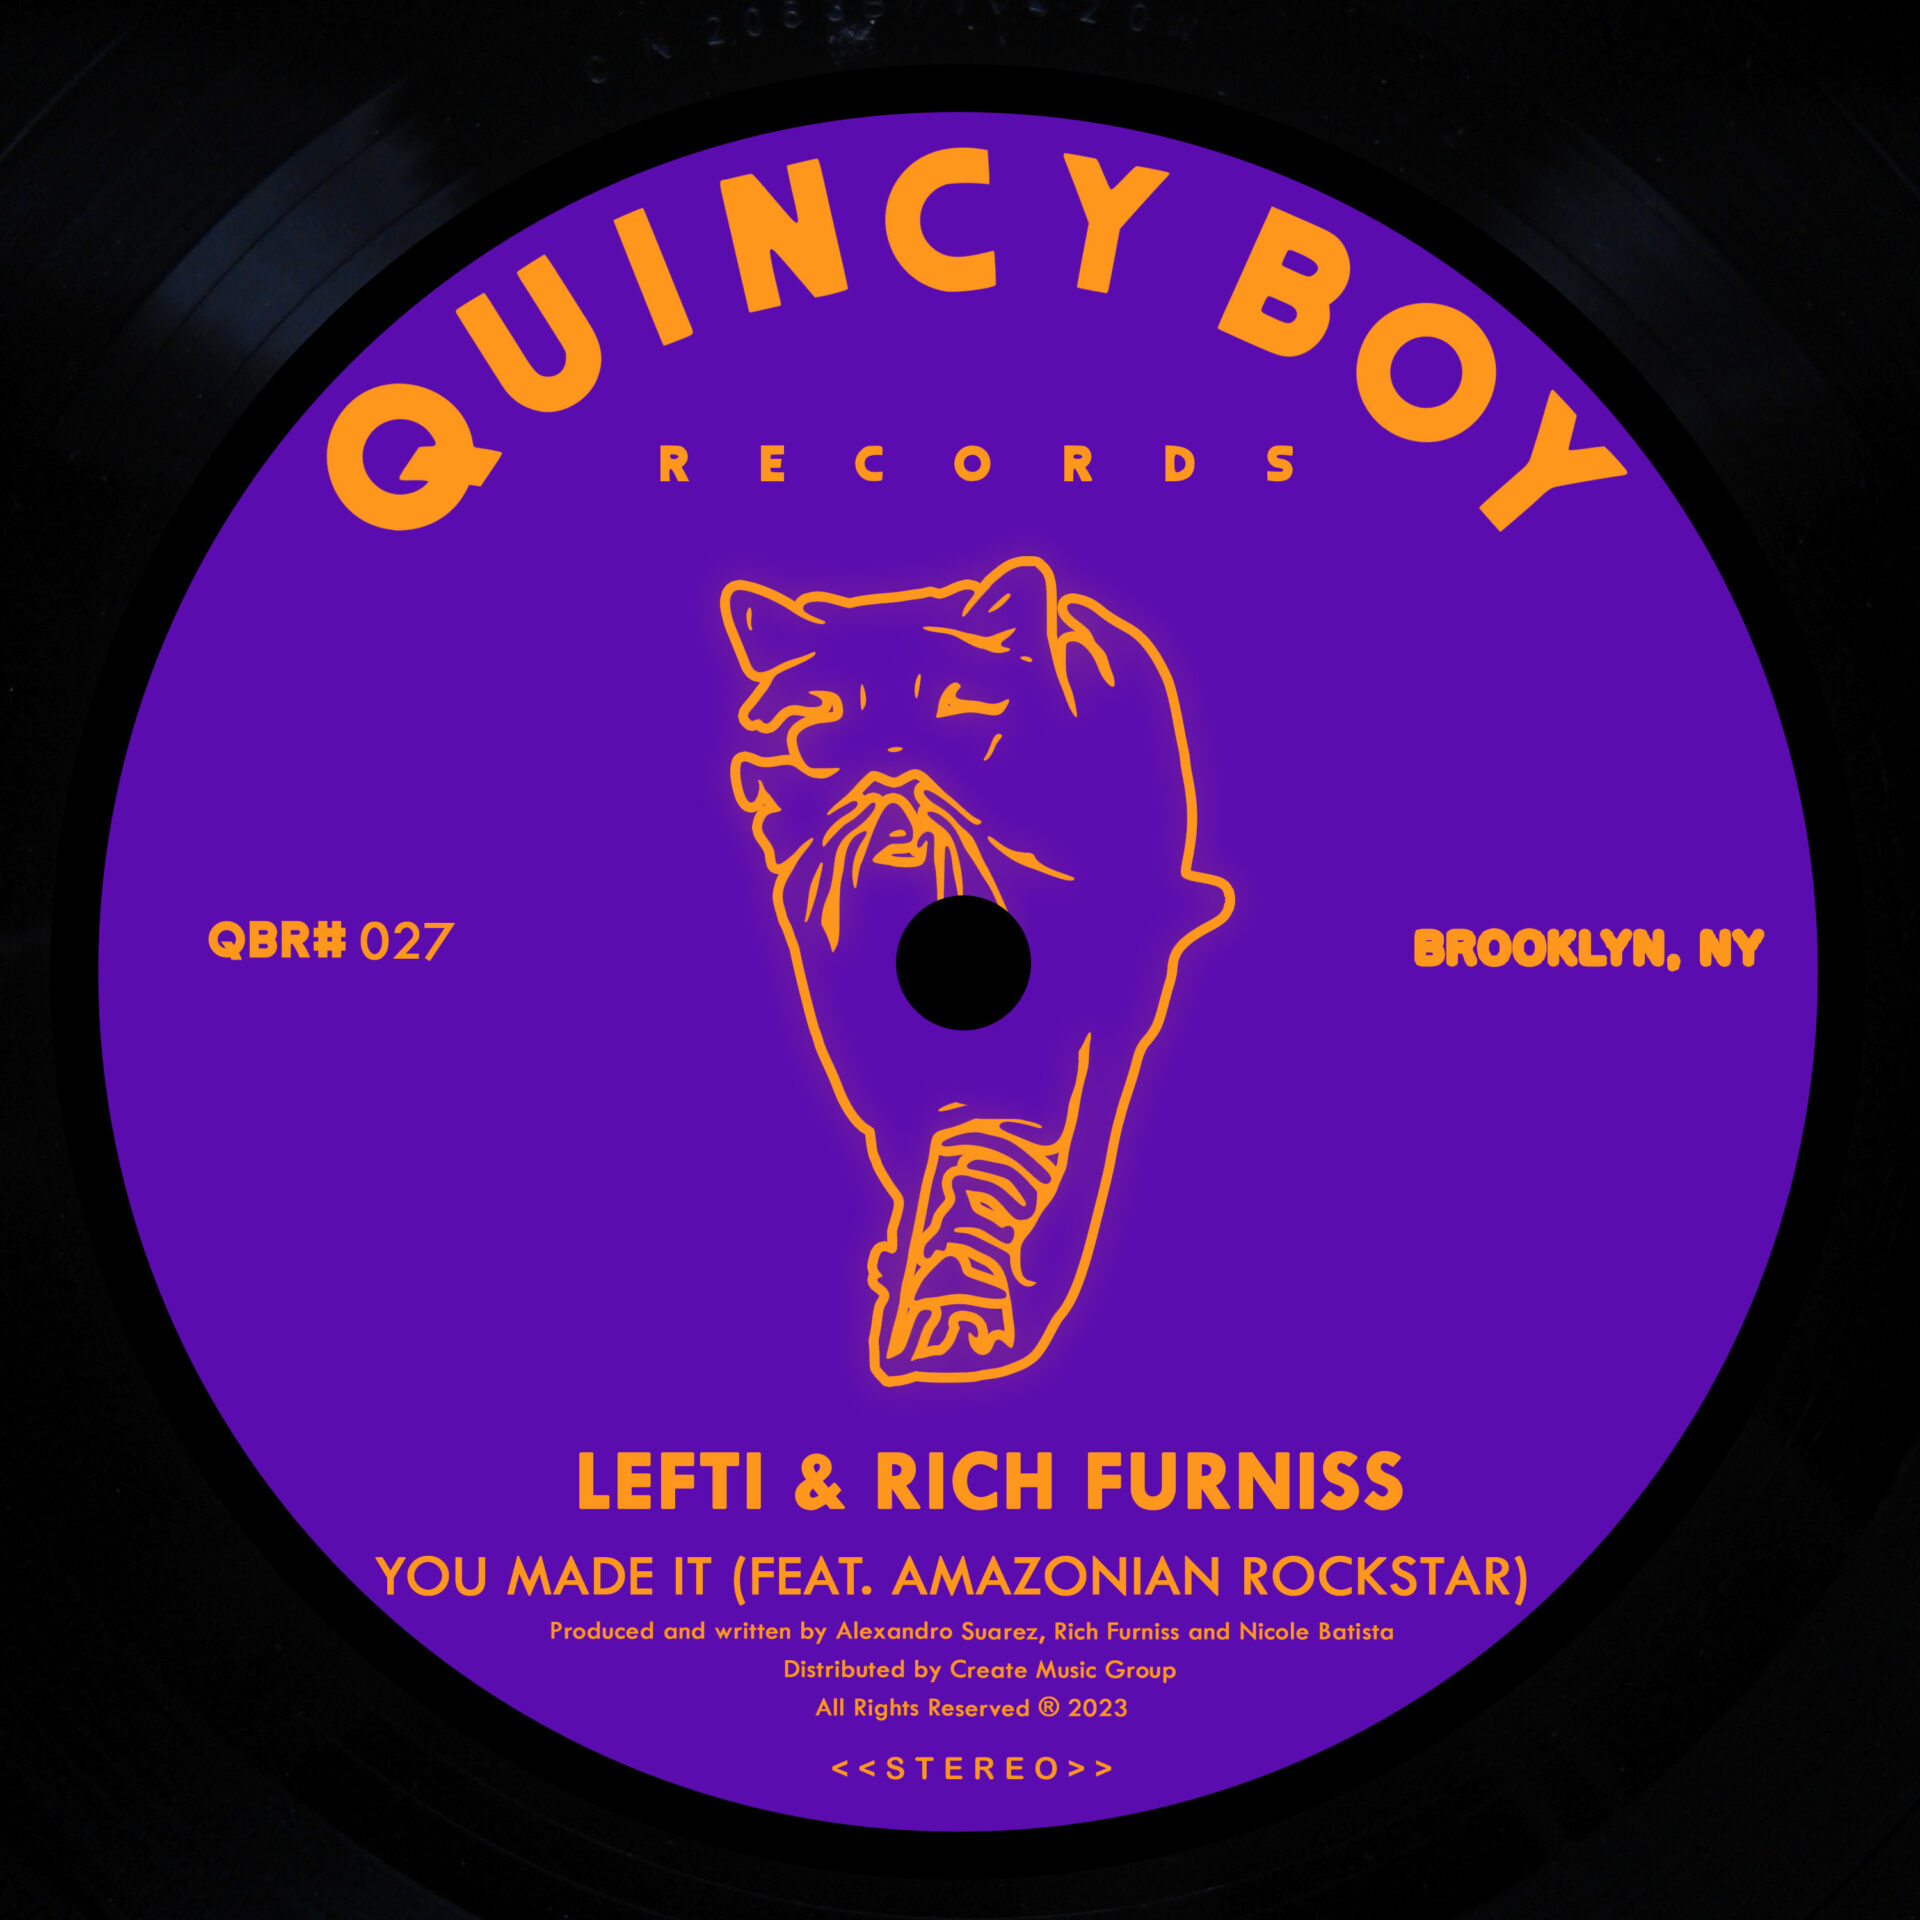 NEWS: Rich Furniss and LEFTI release new single 'You Made It' featuring Amazonian Rockstar